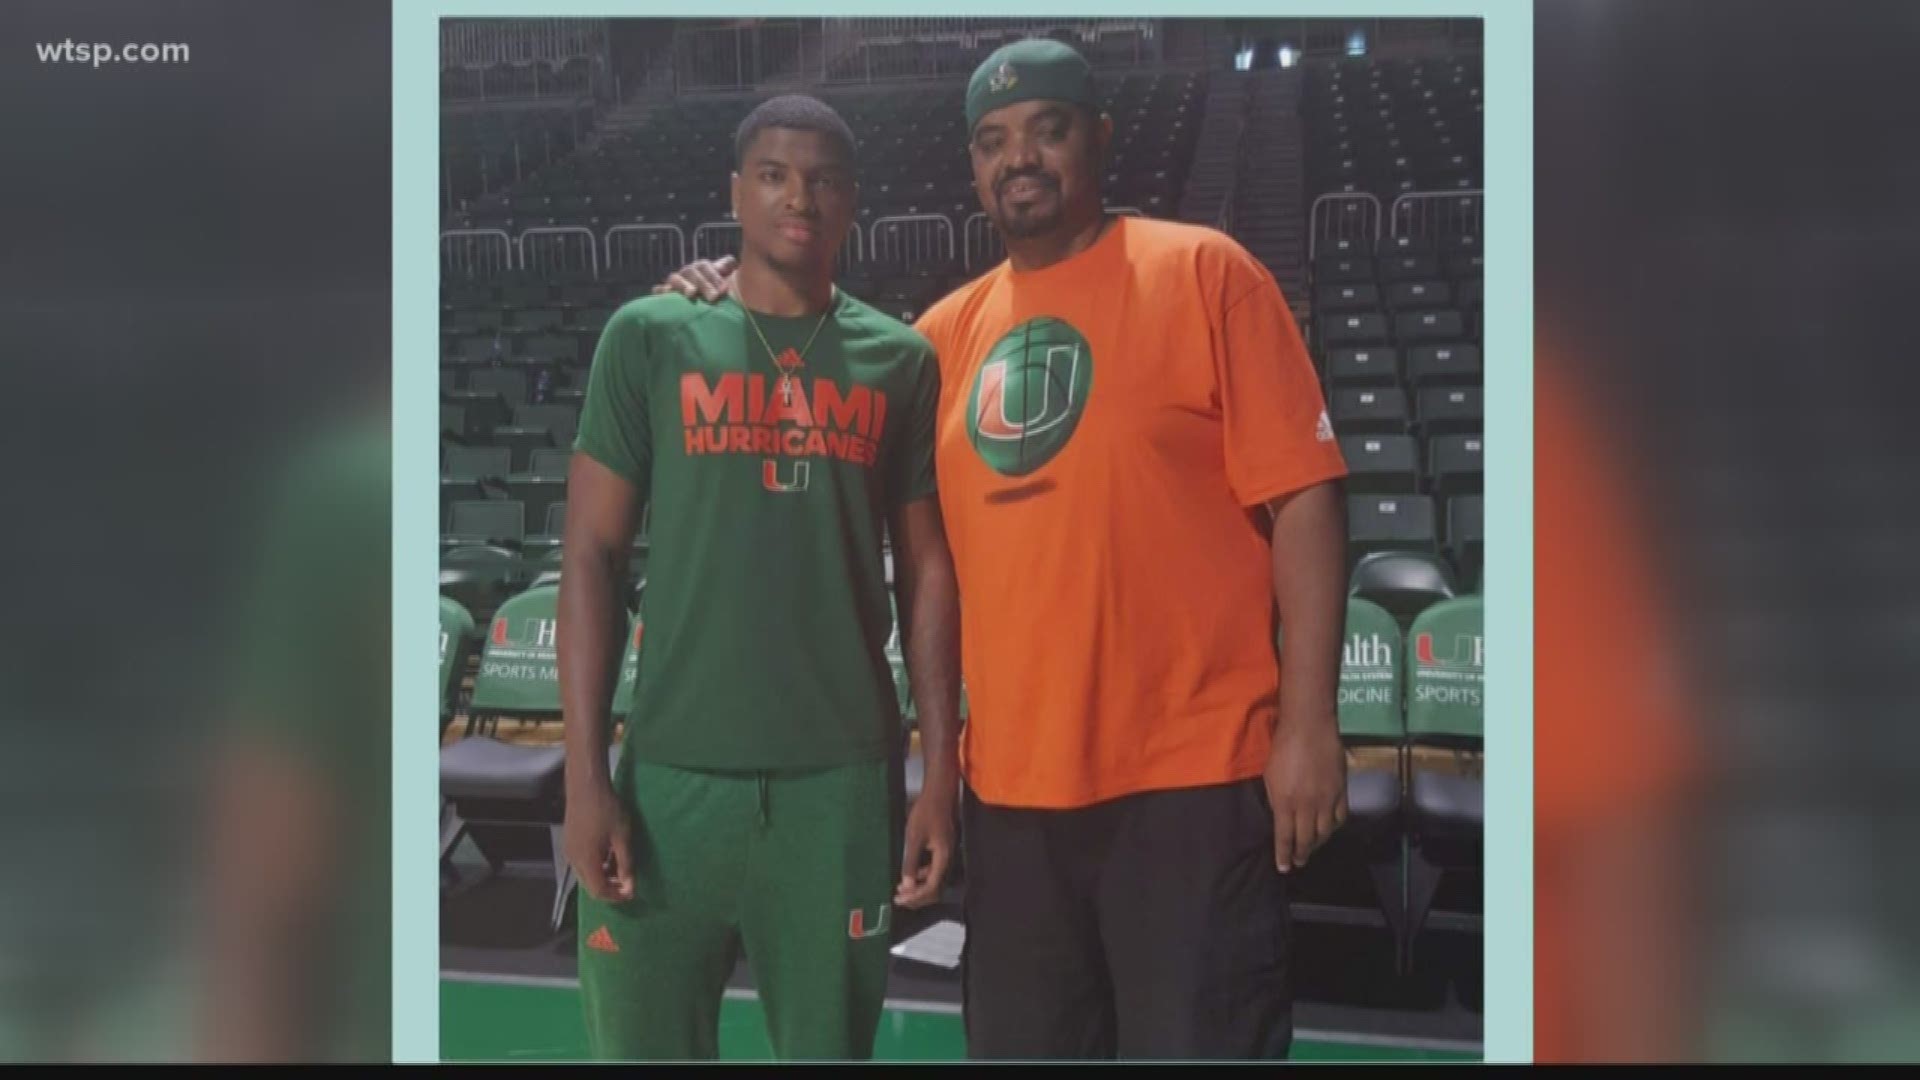 A St. Petersburg father says he finds joy in seeing his son become a man. A Miami Hurricanes basketball player is following his father's footsteps in everything from life, school and even the game itself.